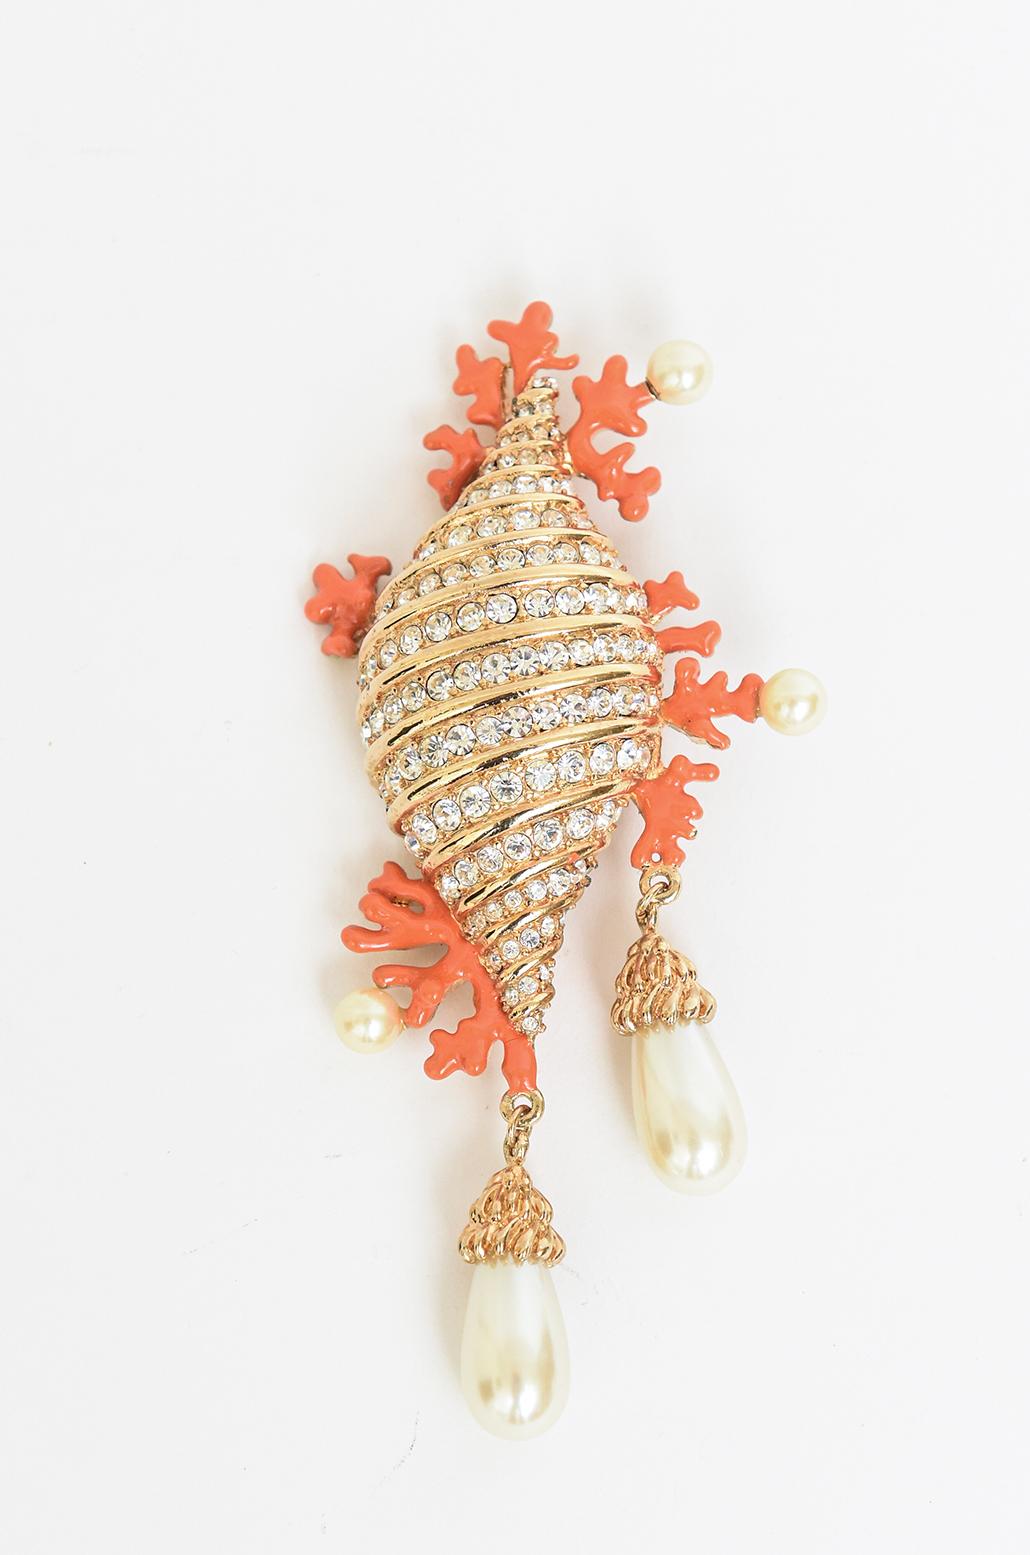 This stunning, rare signed and hallmarked Hutton Wilkinson pin and or brooch is a seashell of the gorgeous combination of coral enamel faux pearl, gold plate and rhinestone. It is hallmarked with his initials of H and W and a crown and says Made in